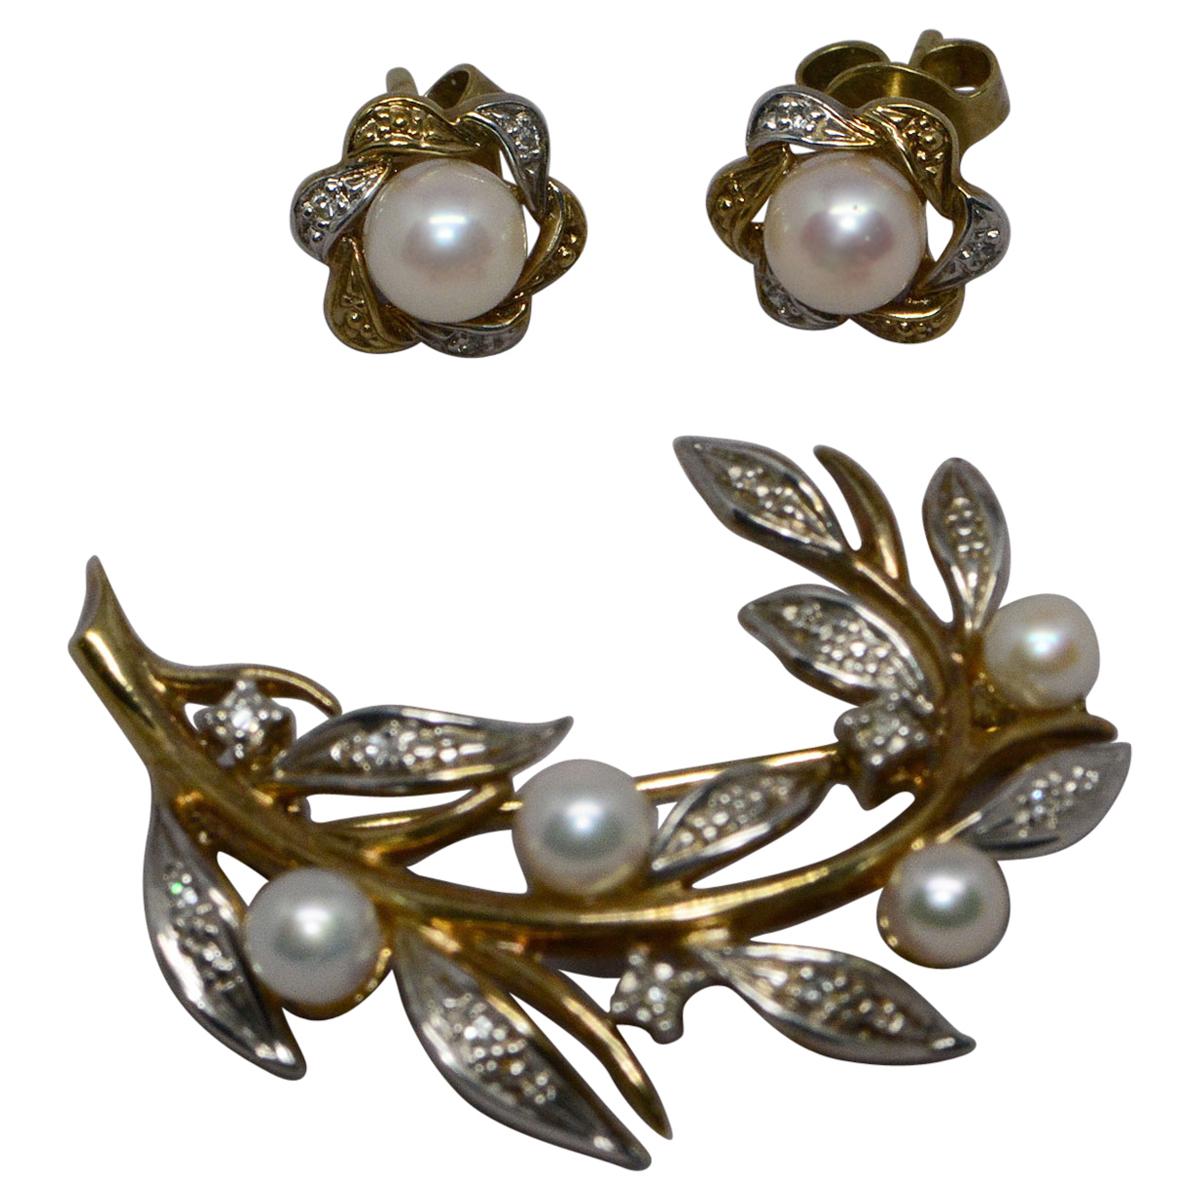 Floral Cultured Pearl and Diamond 9 Karat Gold Brooch and Earrings